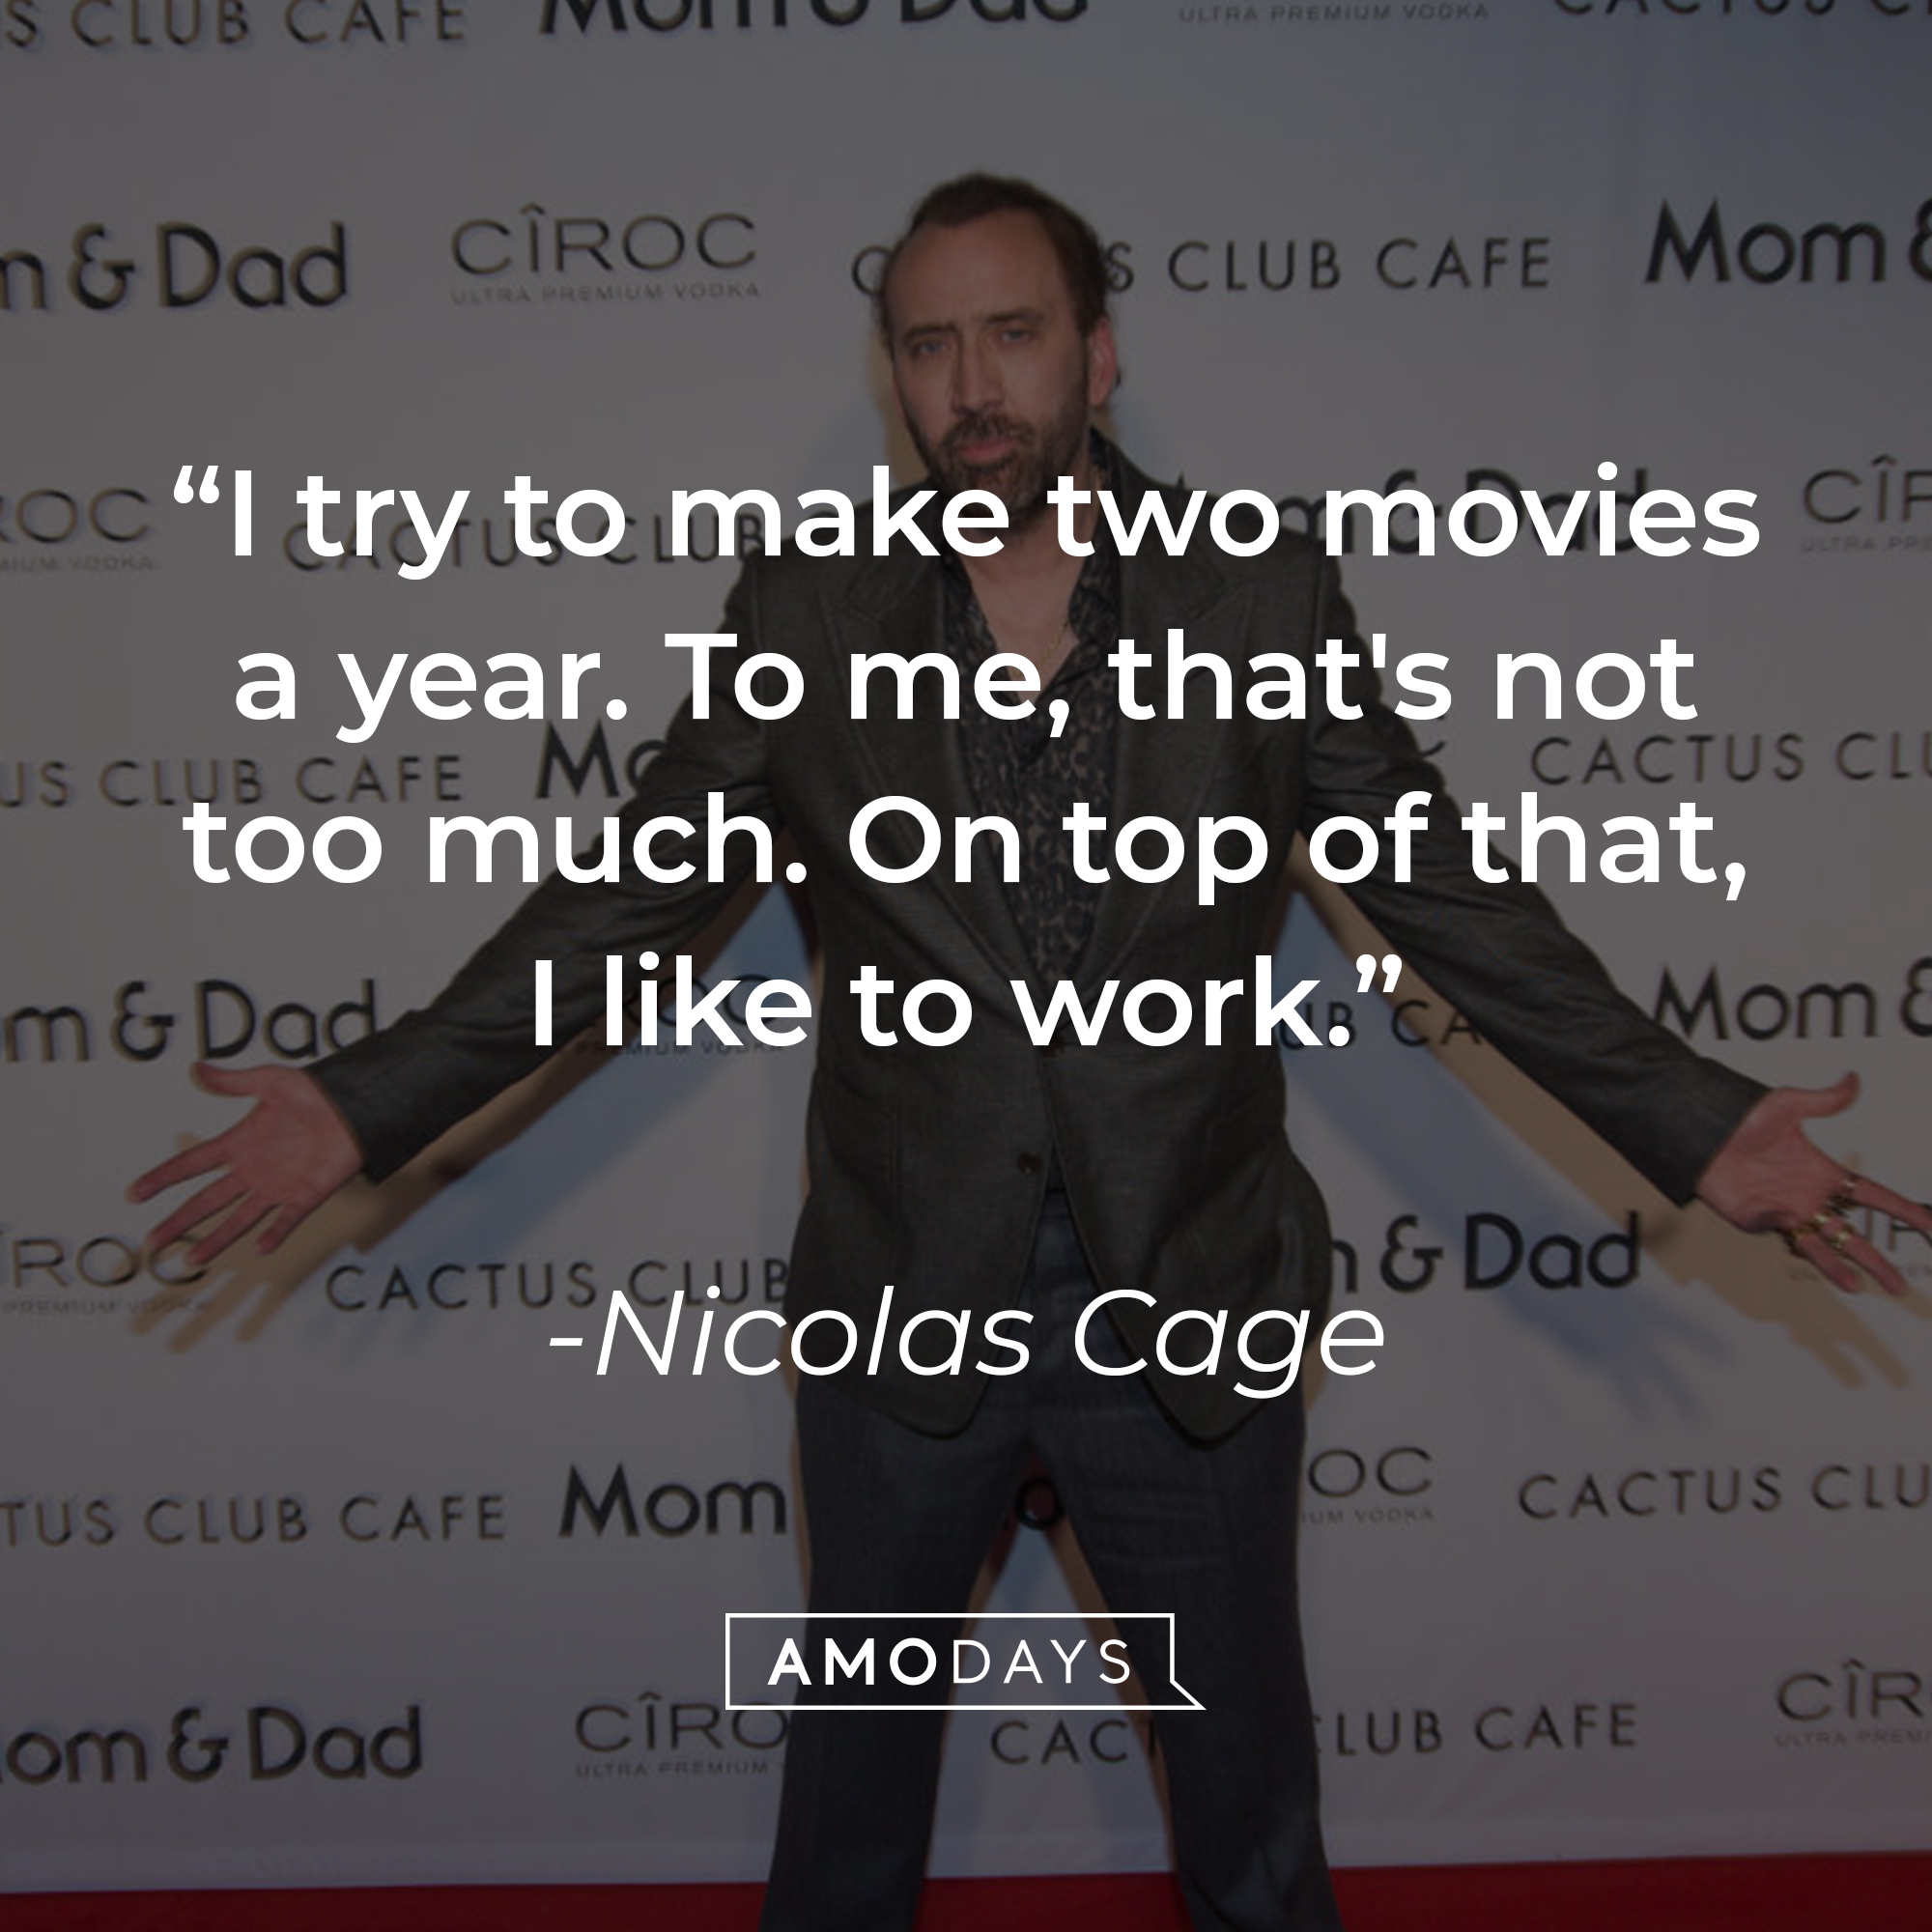 Nicolas Cage's quote: "I try to make two movies a year. To me, that's not too much. On top of that, I like to work." | Source: Getty Images